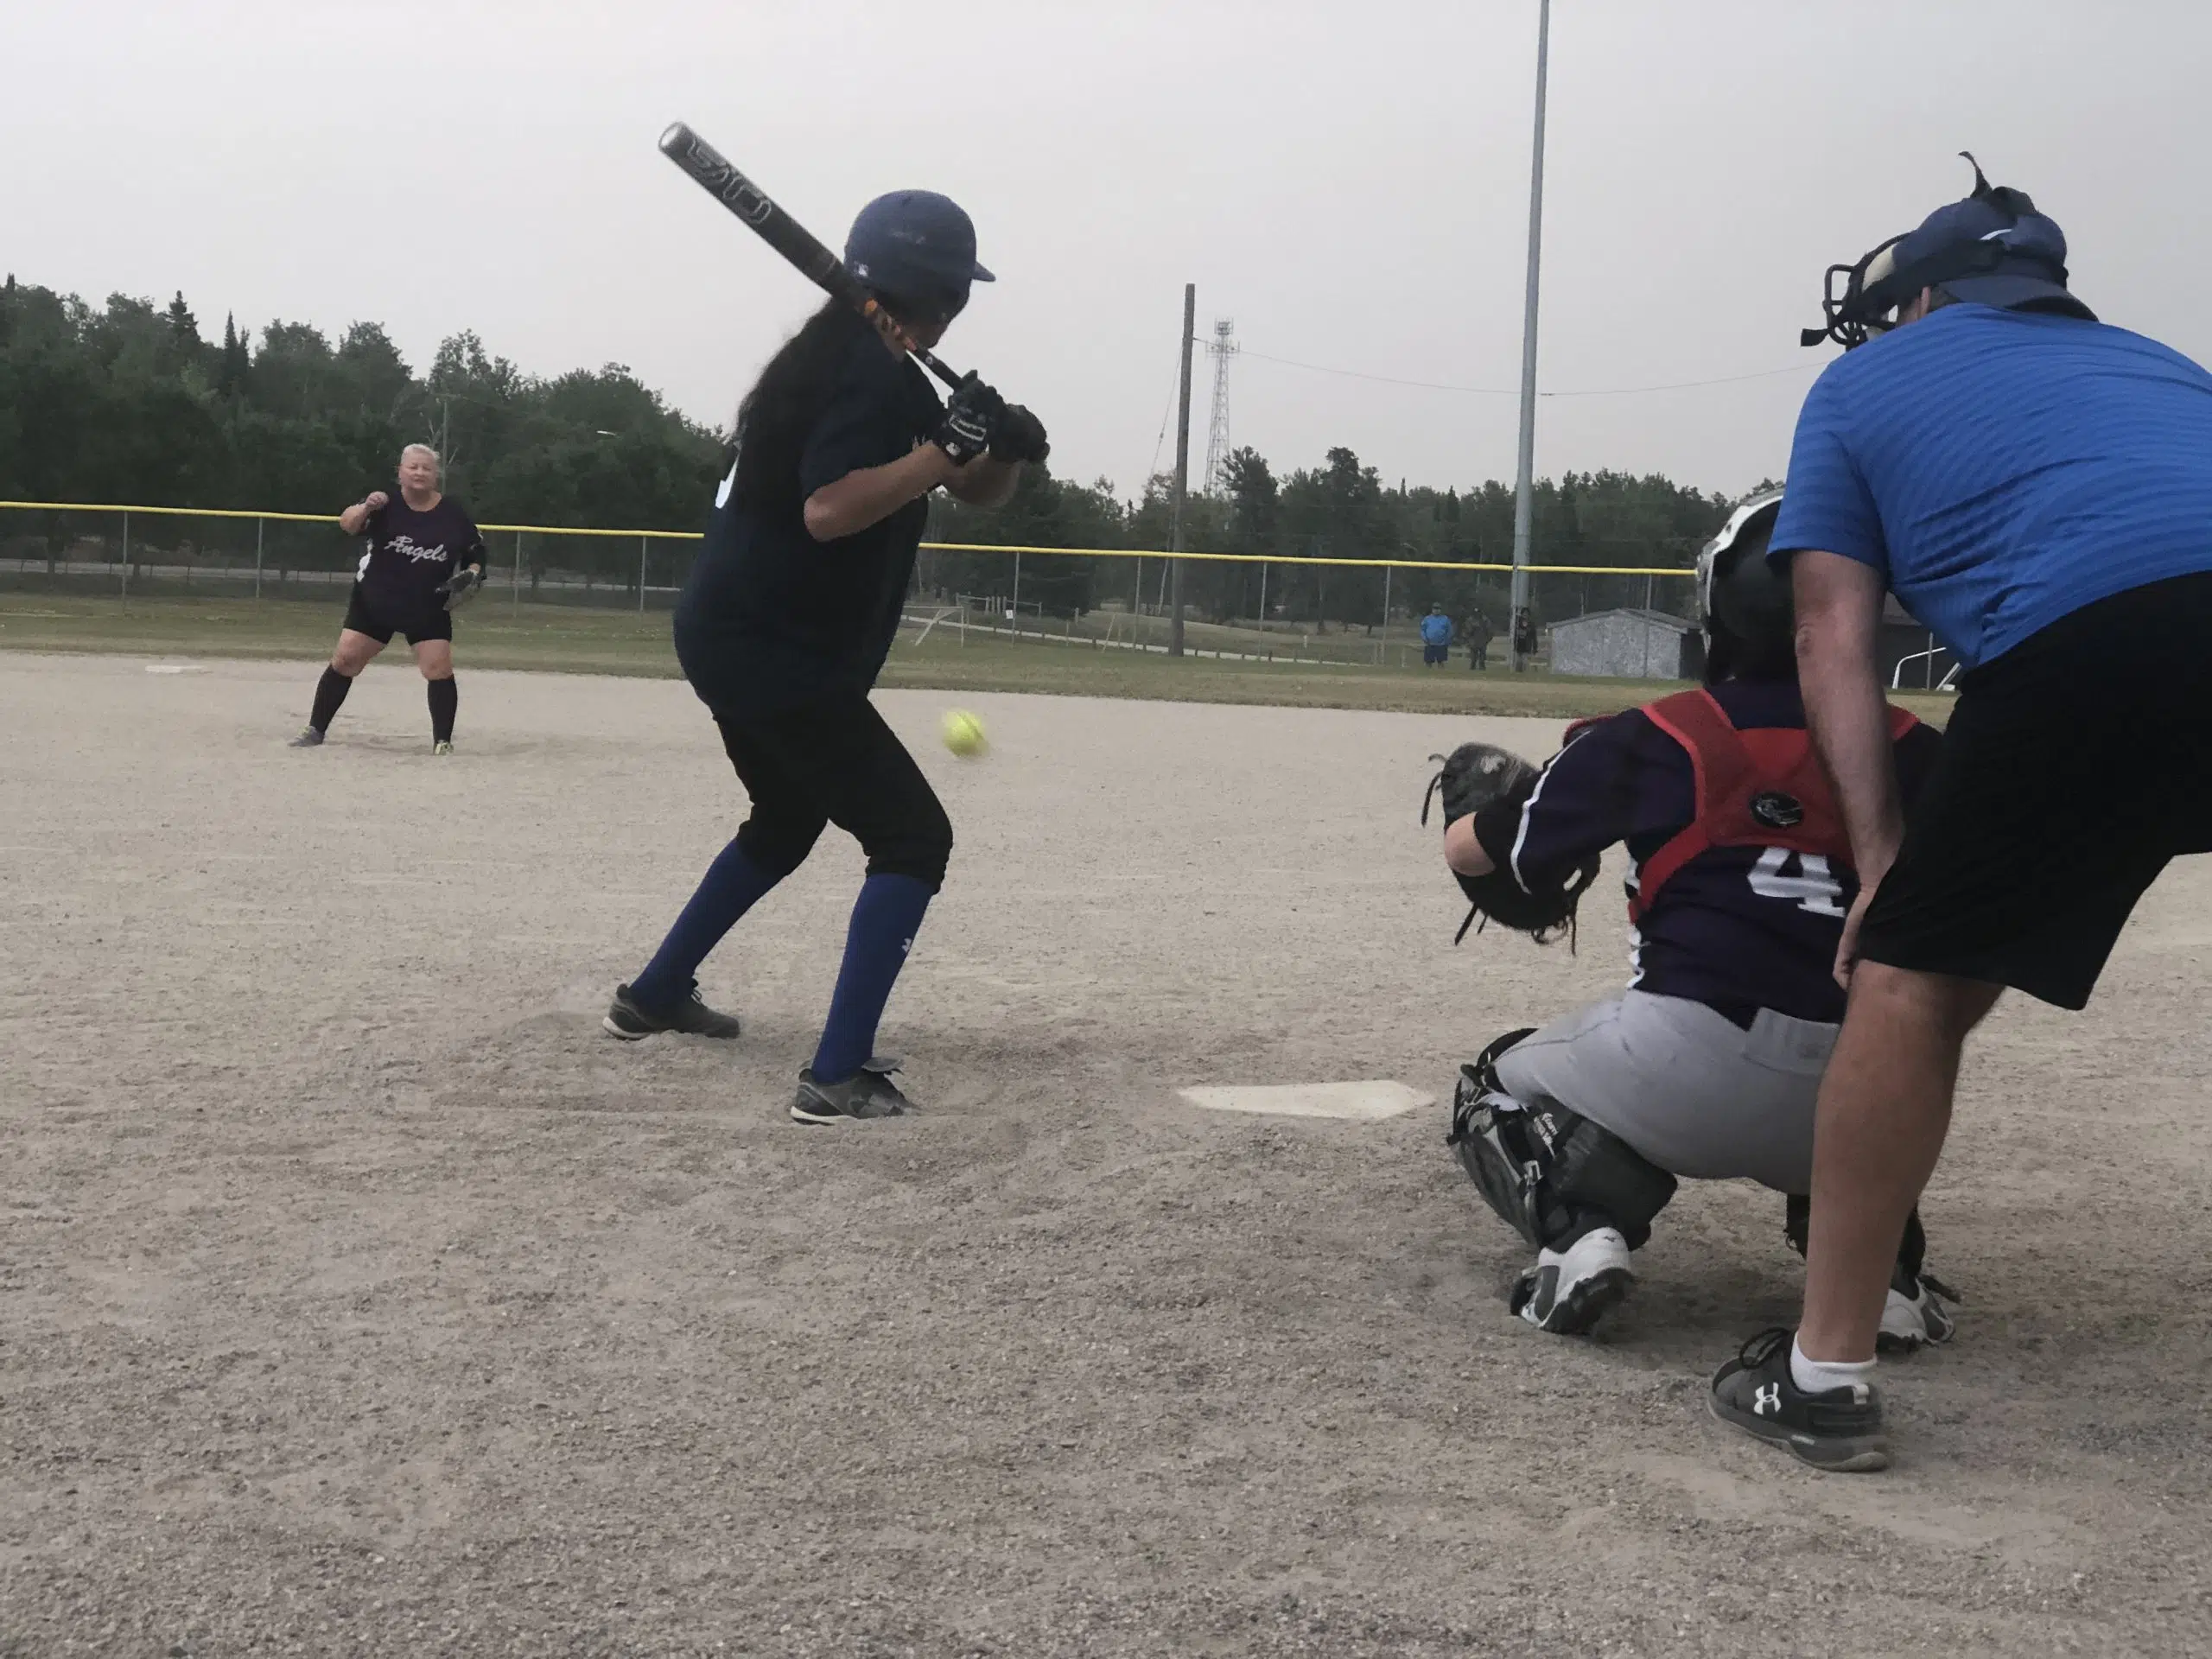 Ladies Fastball Championship Series All Tied Up